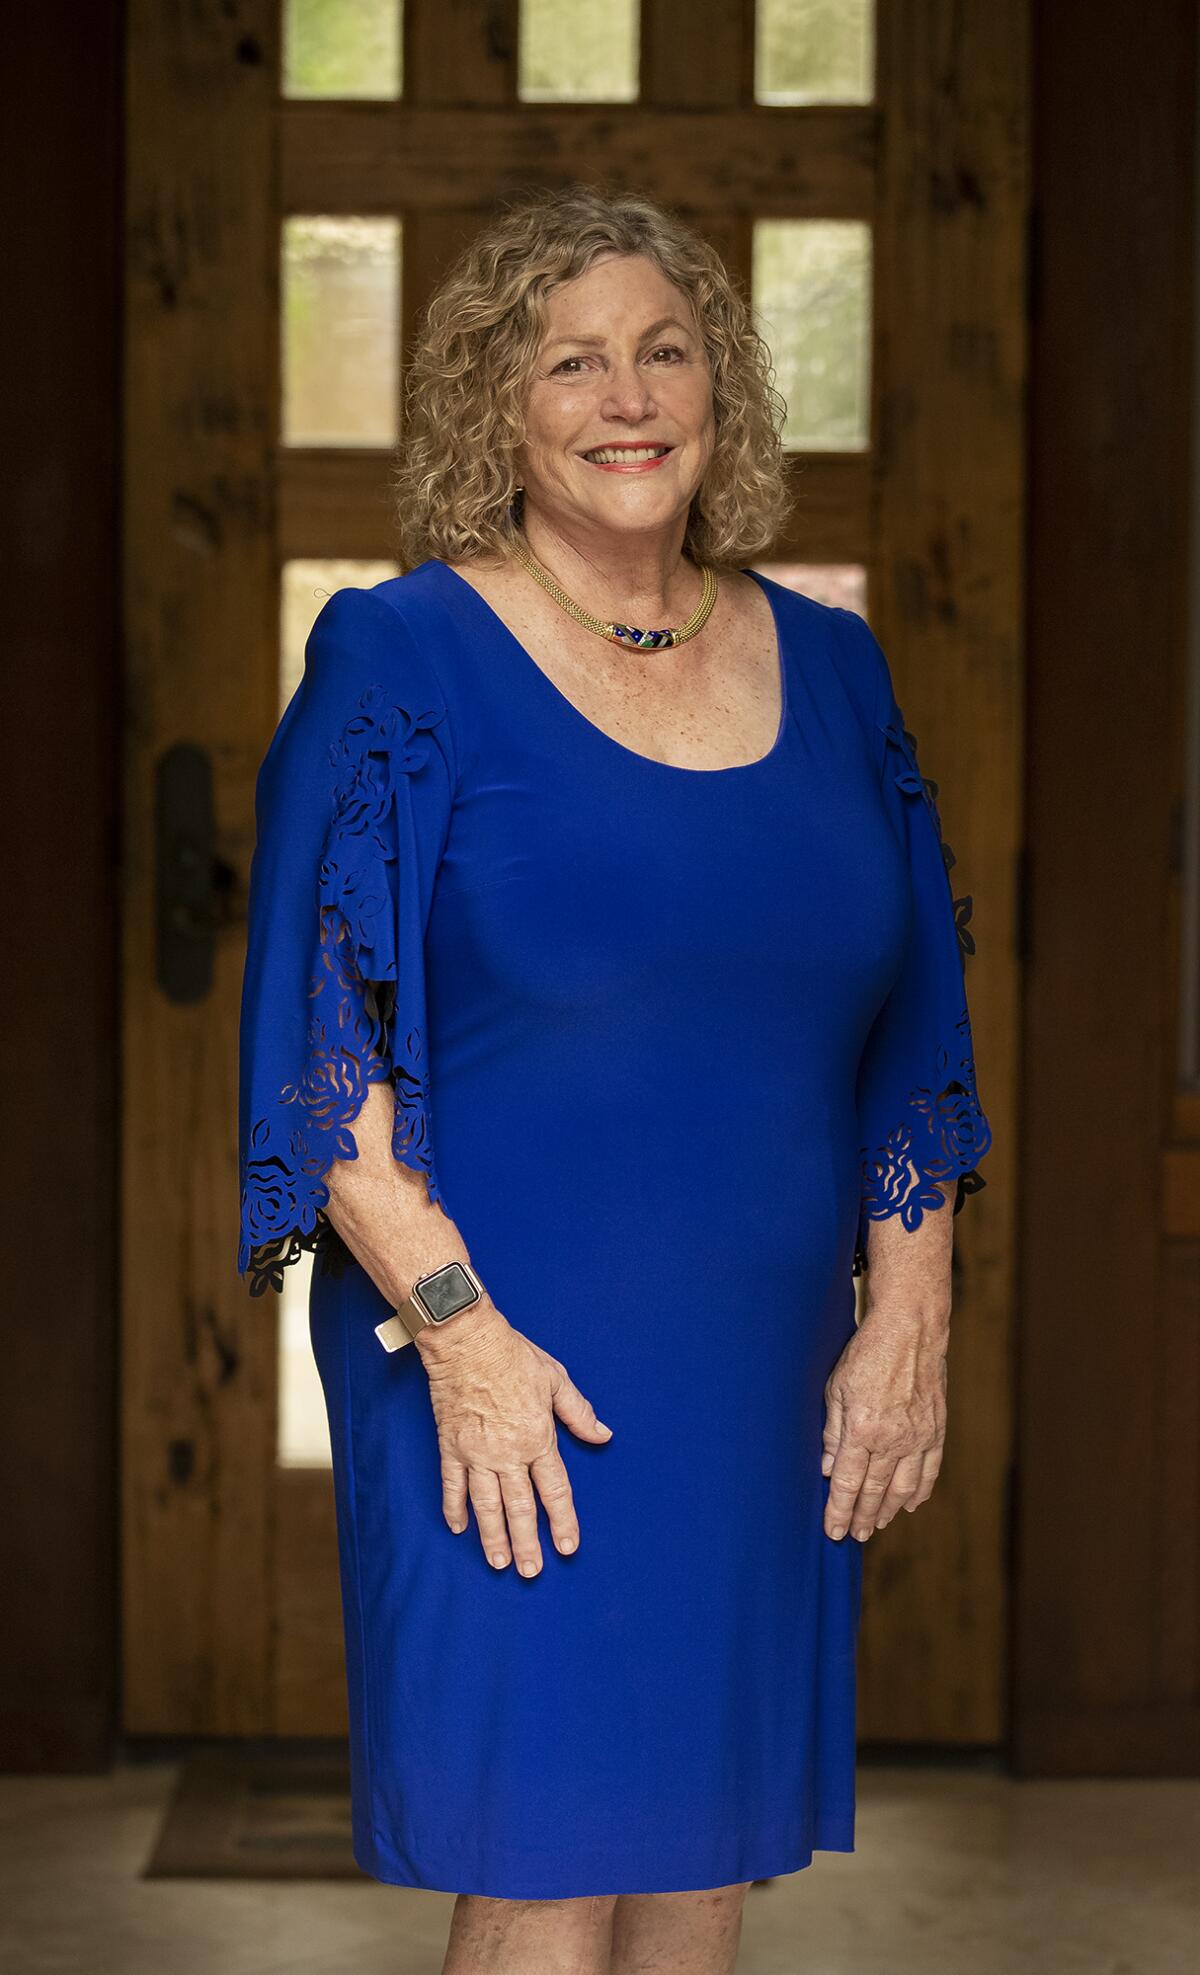 Nella Webster O’Grady, of Newport Coast, just won the award for Outstanding Philanthropist.